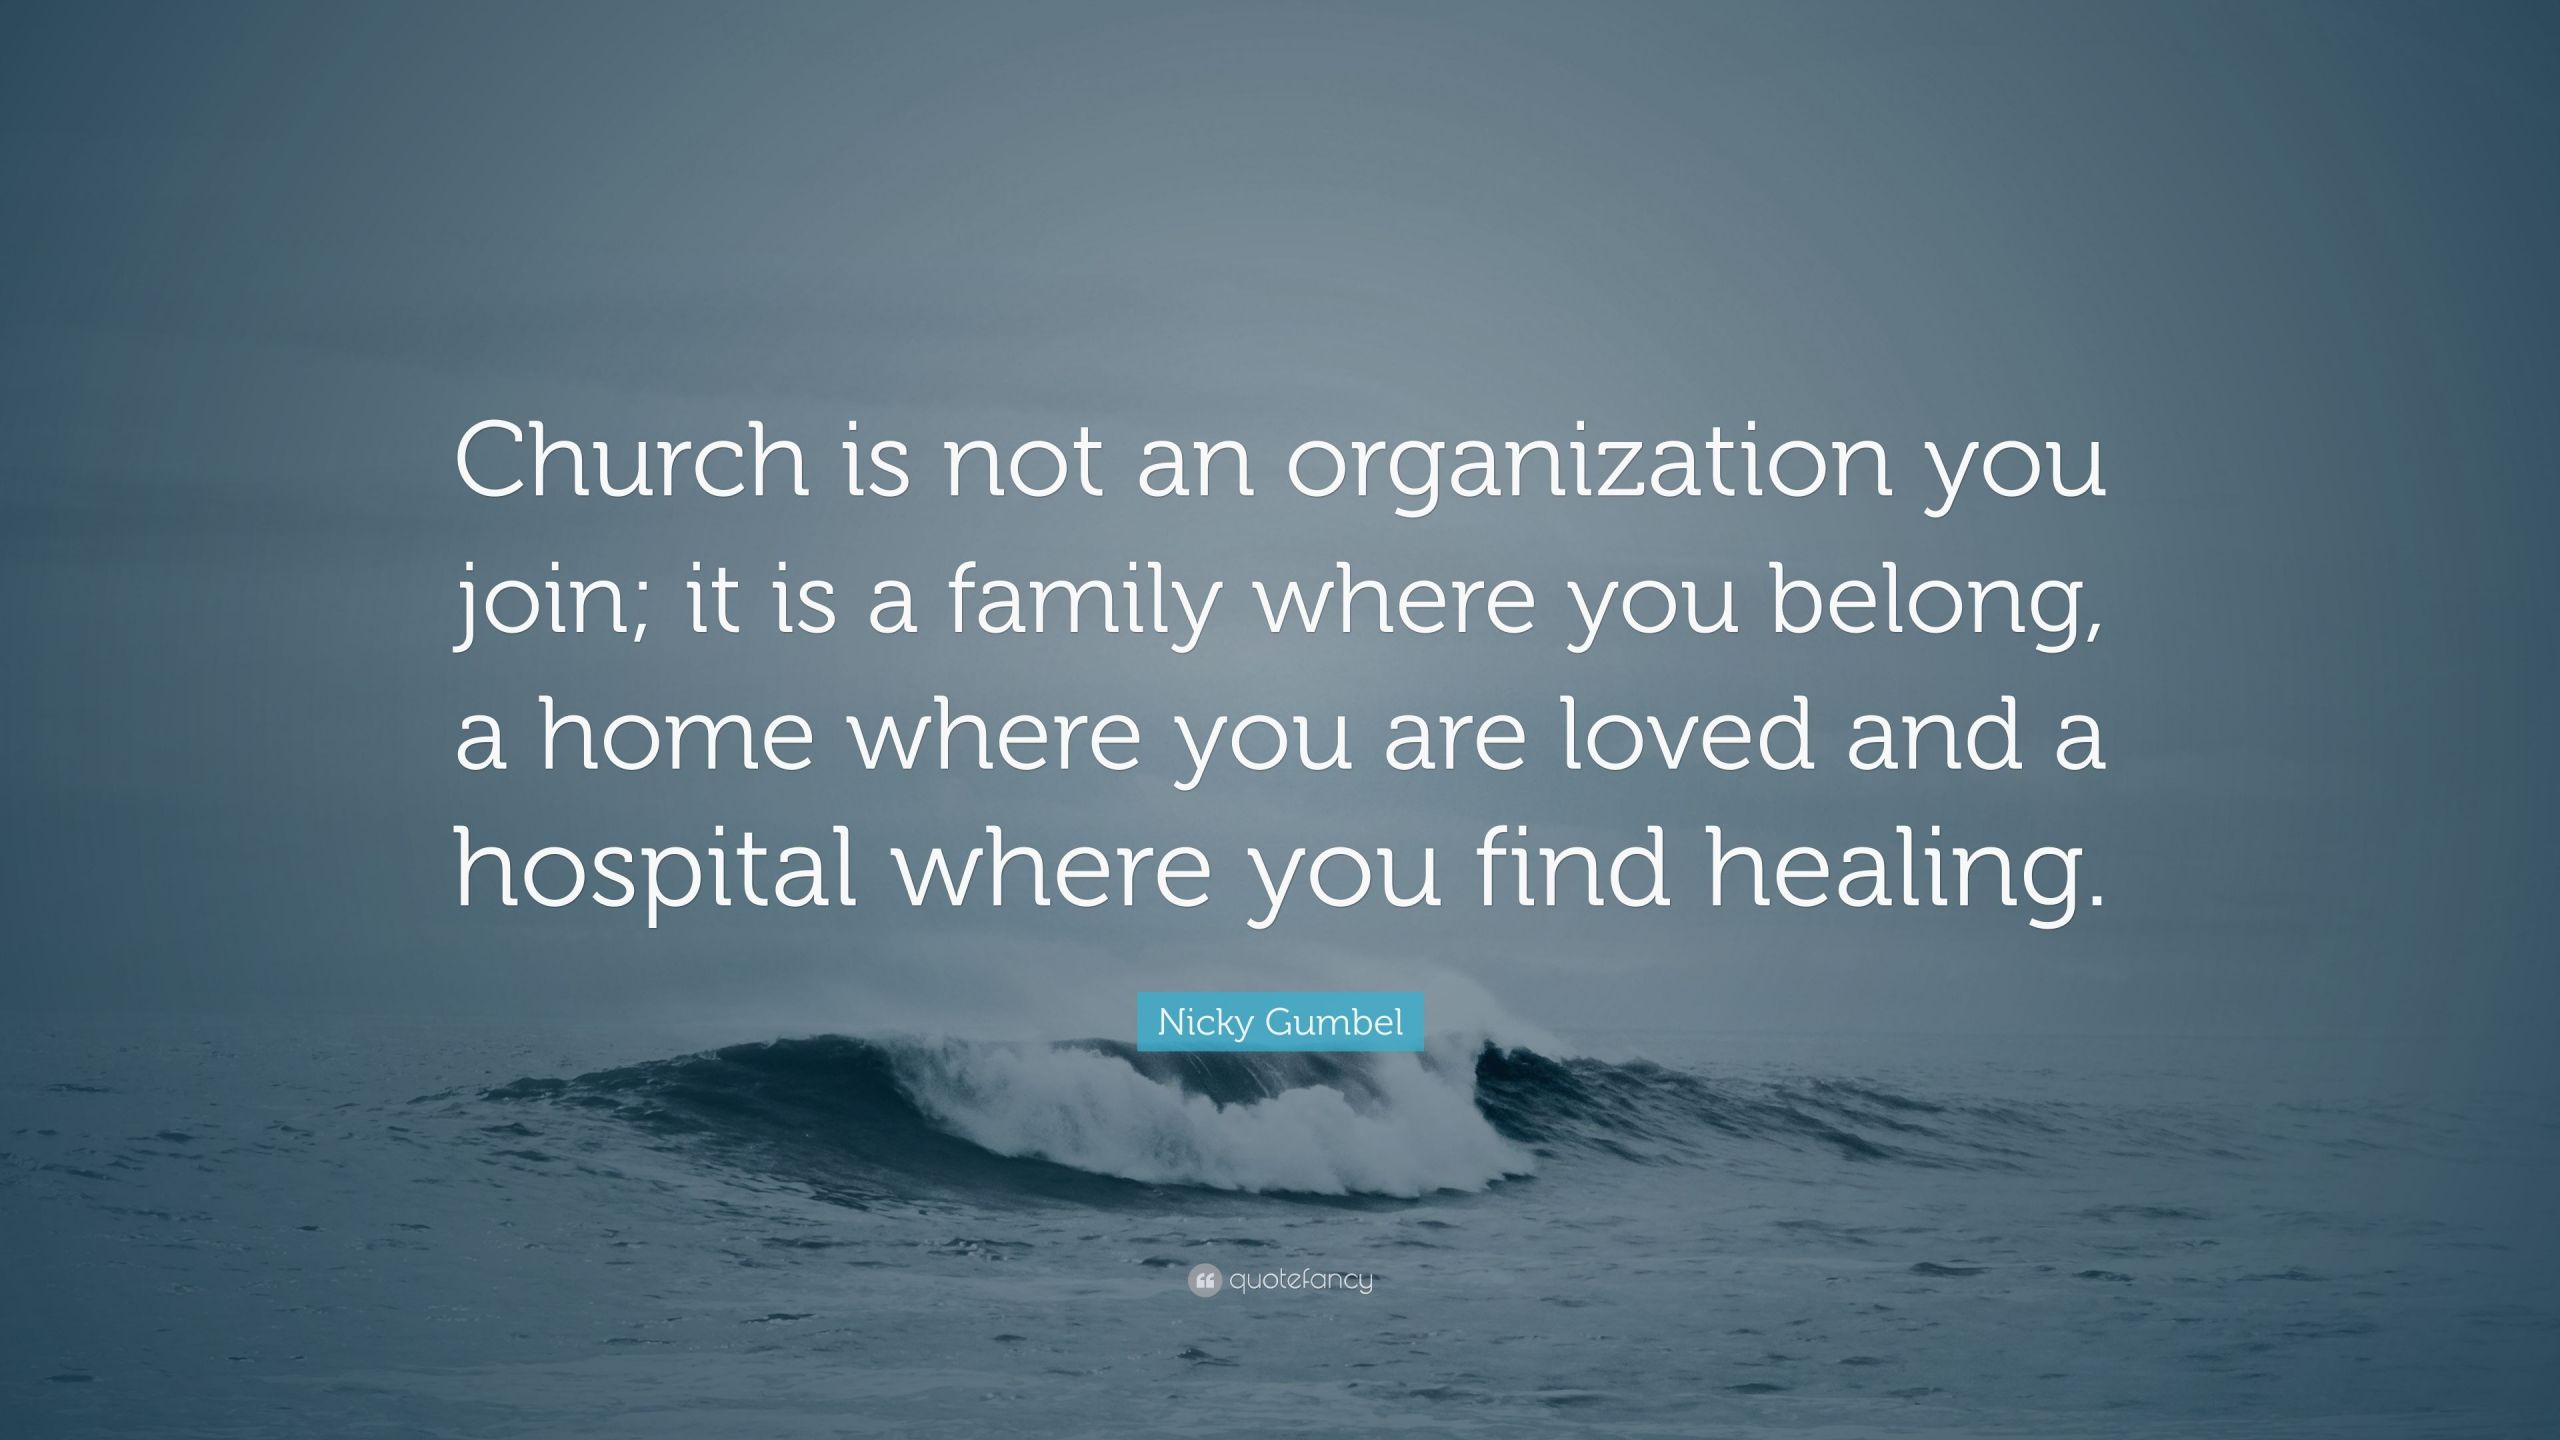 Church Family Quotes
 Nicky Gumbel Quote “Church is not an organization you